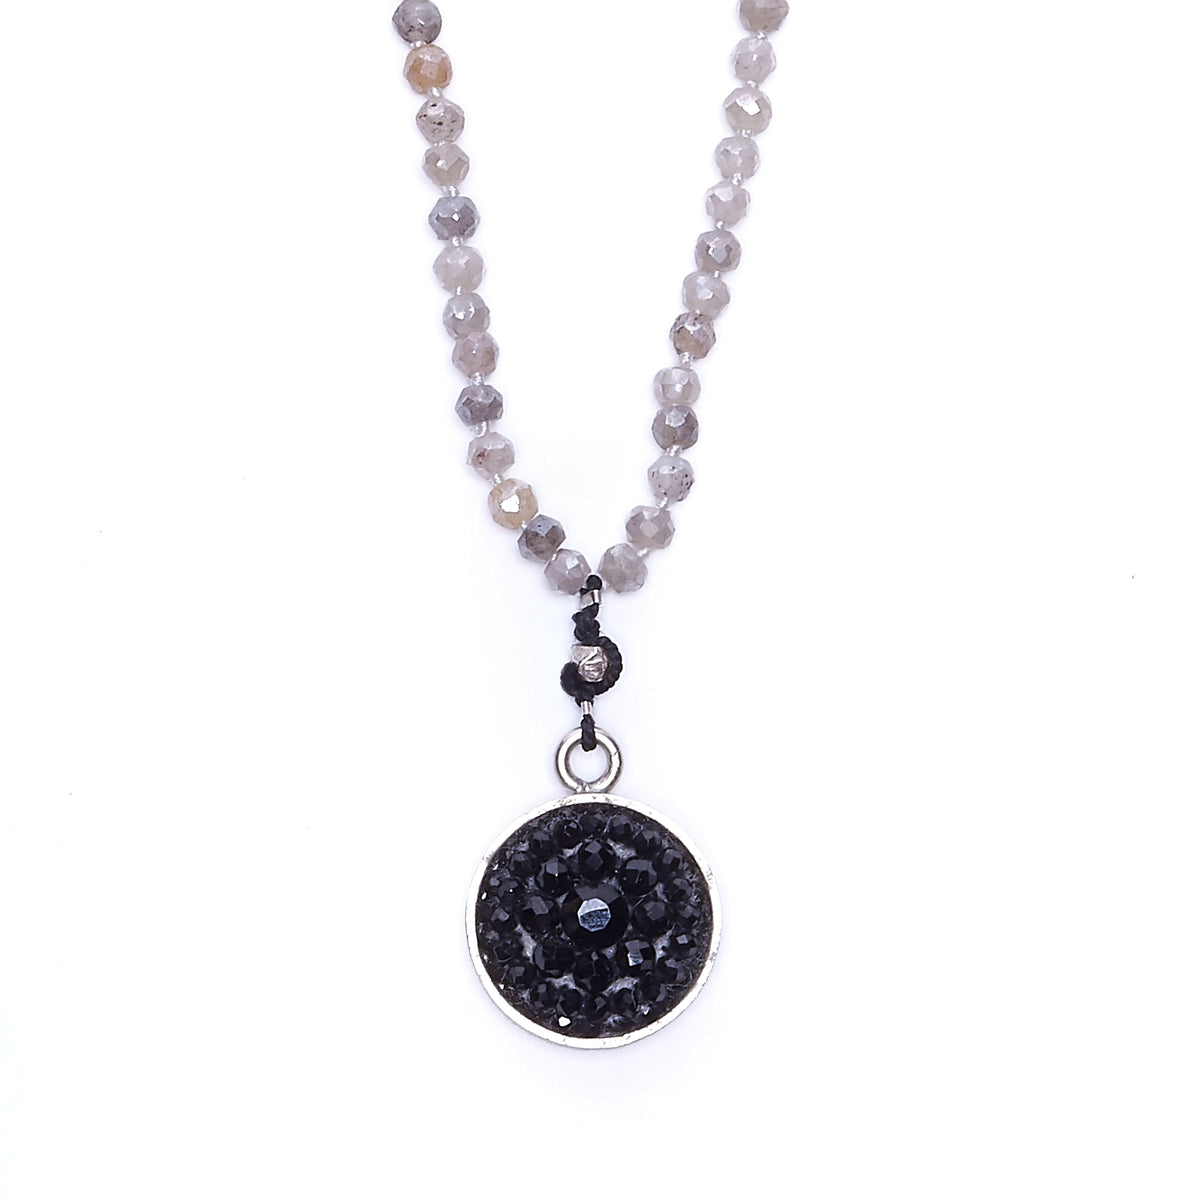 Black Onyx Iconic Necklace with Faceted Labradorite